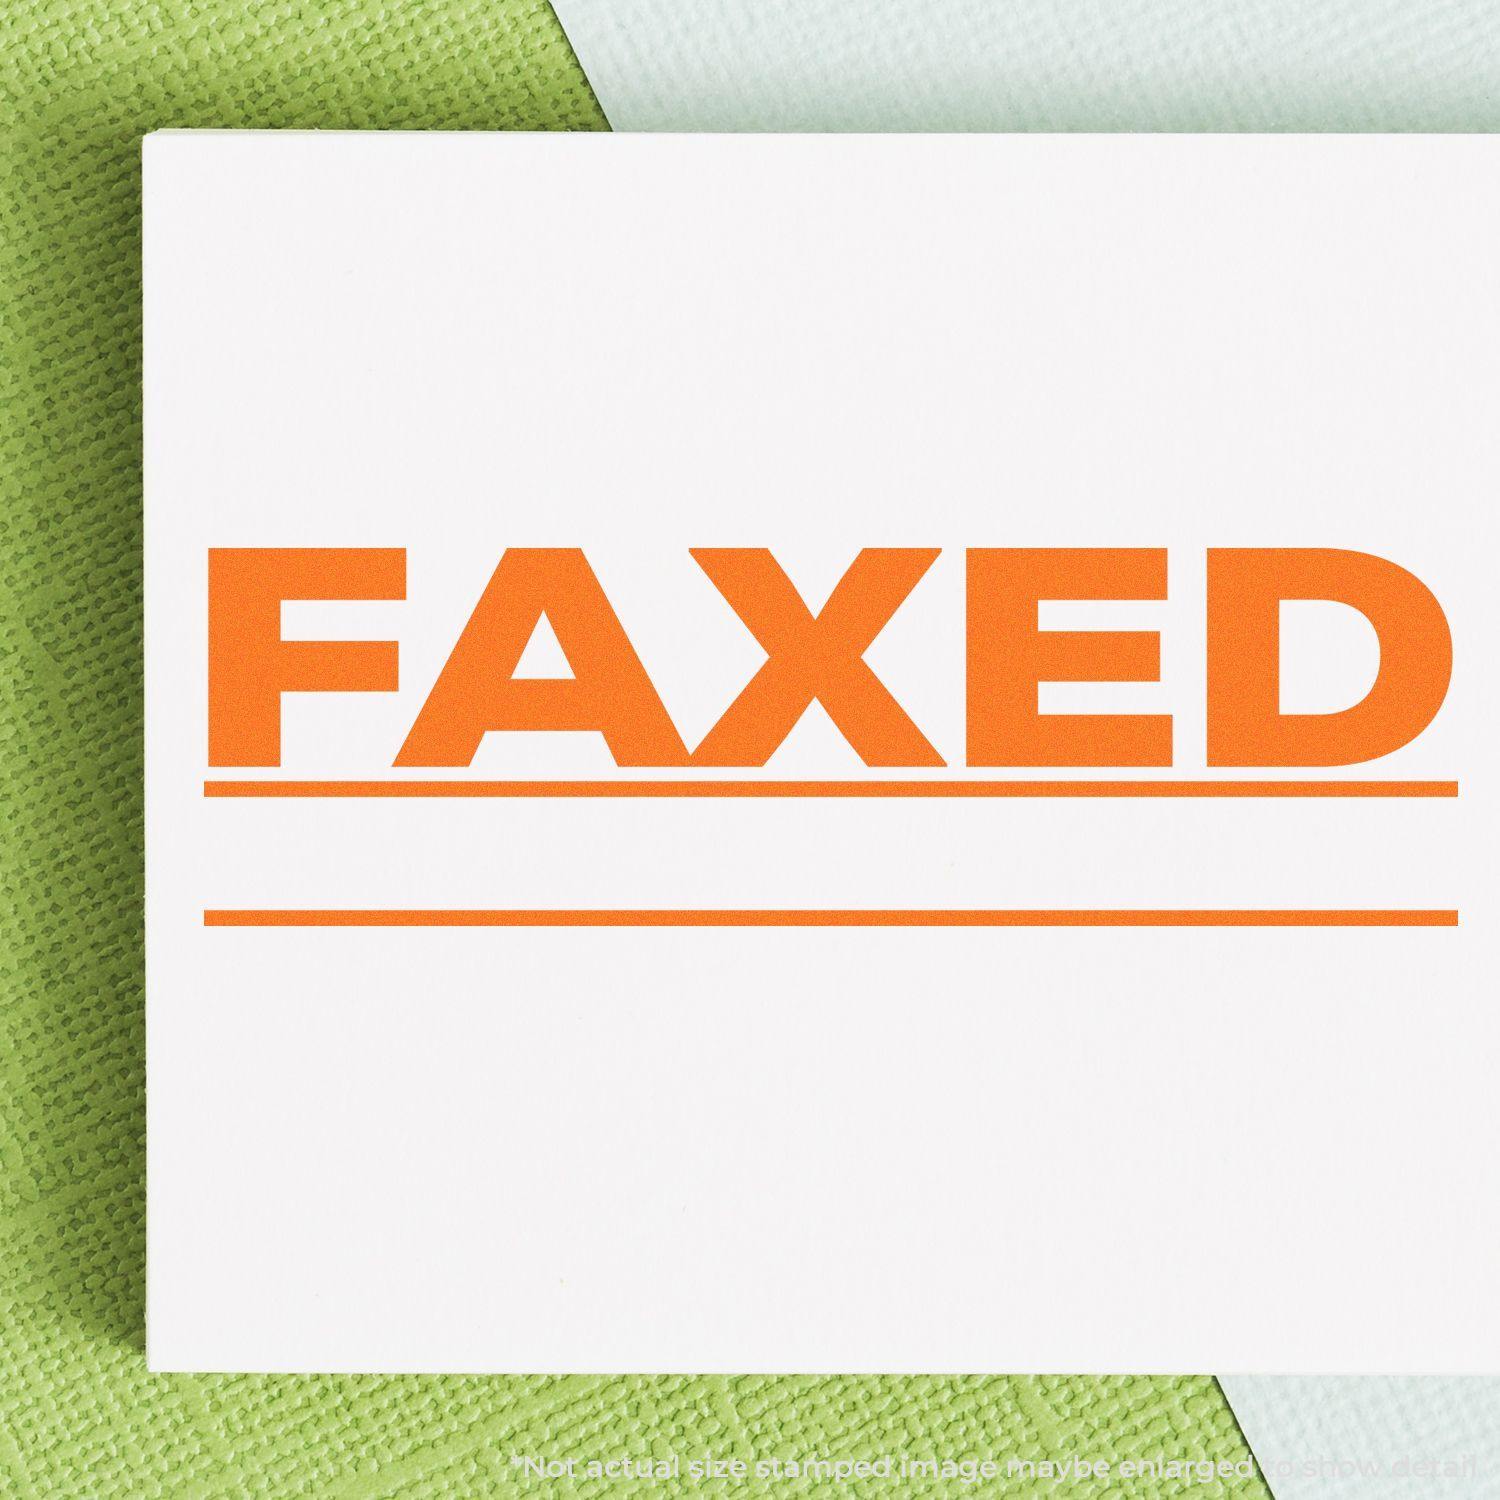 A self-inking stamp with a stamped image showing how the text "FAXED" in a large font with two lines underneath is displayed by it after stamping.